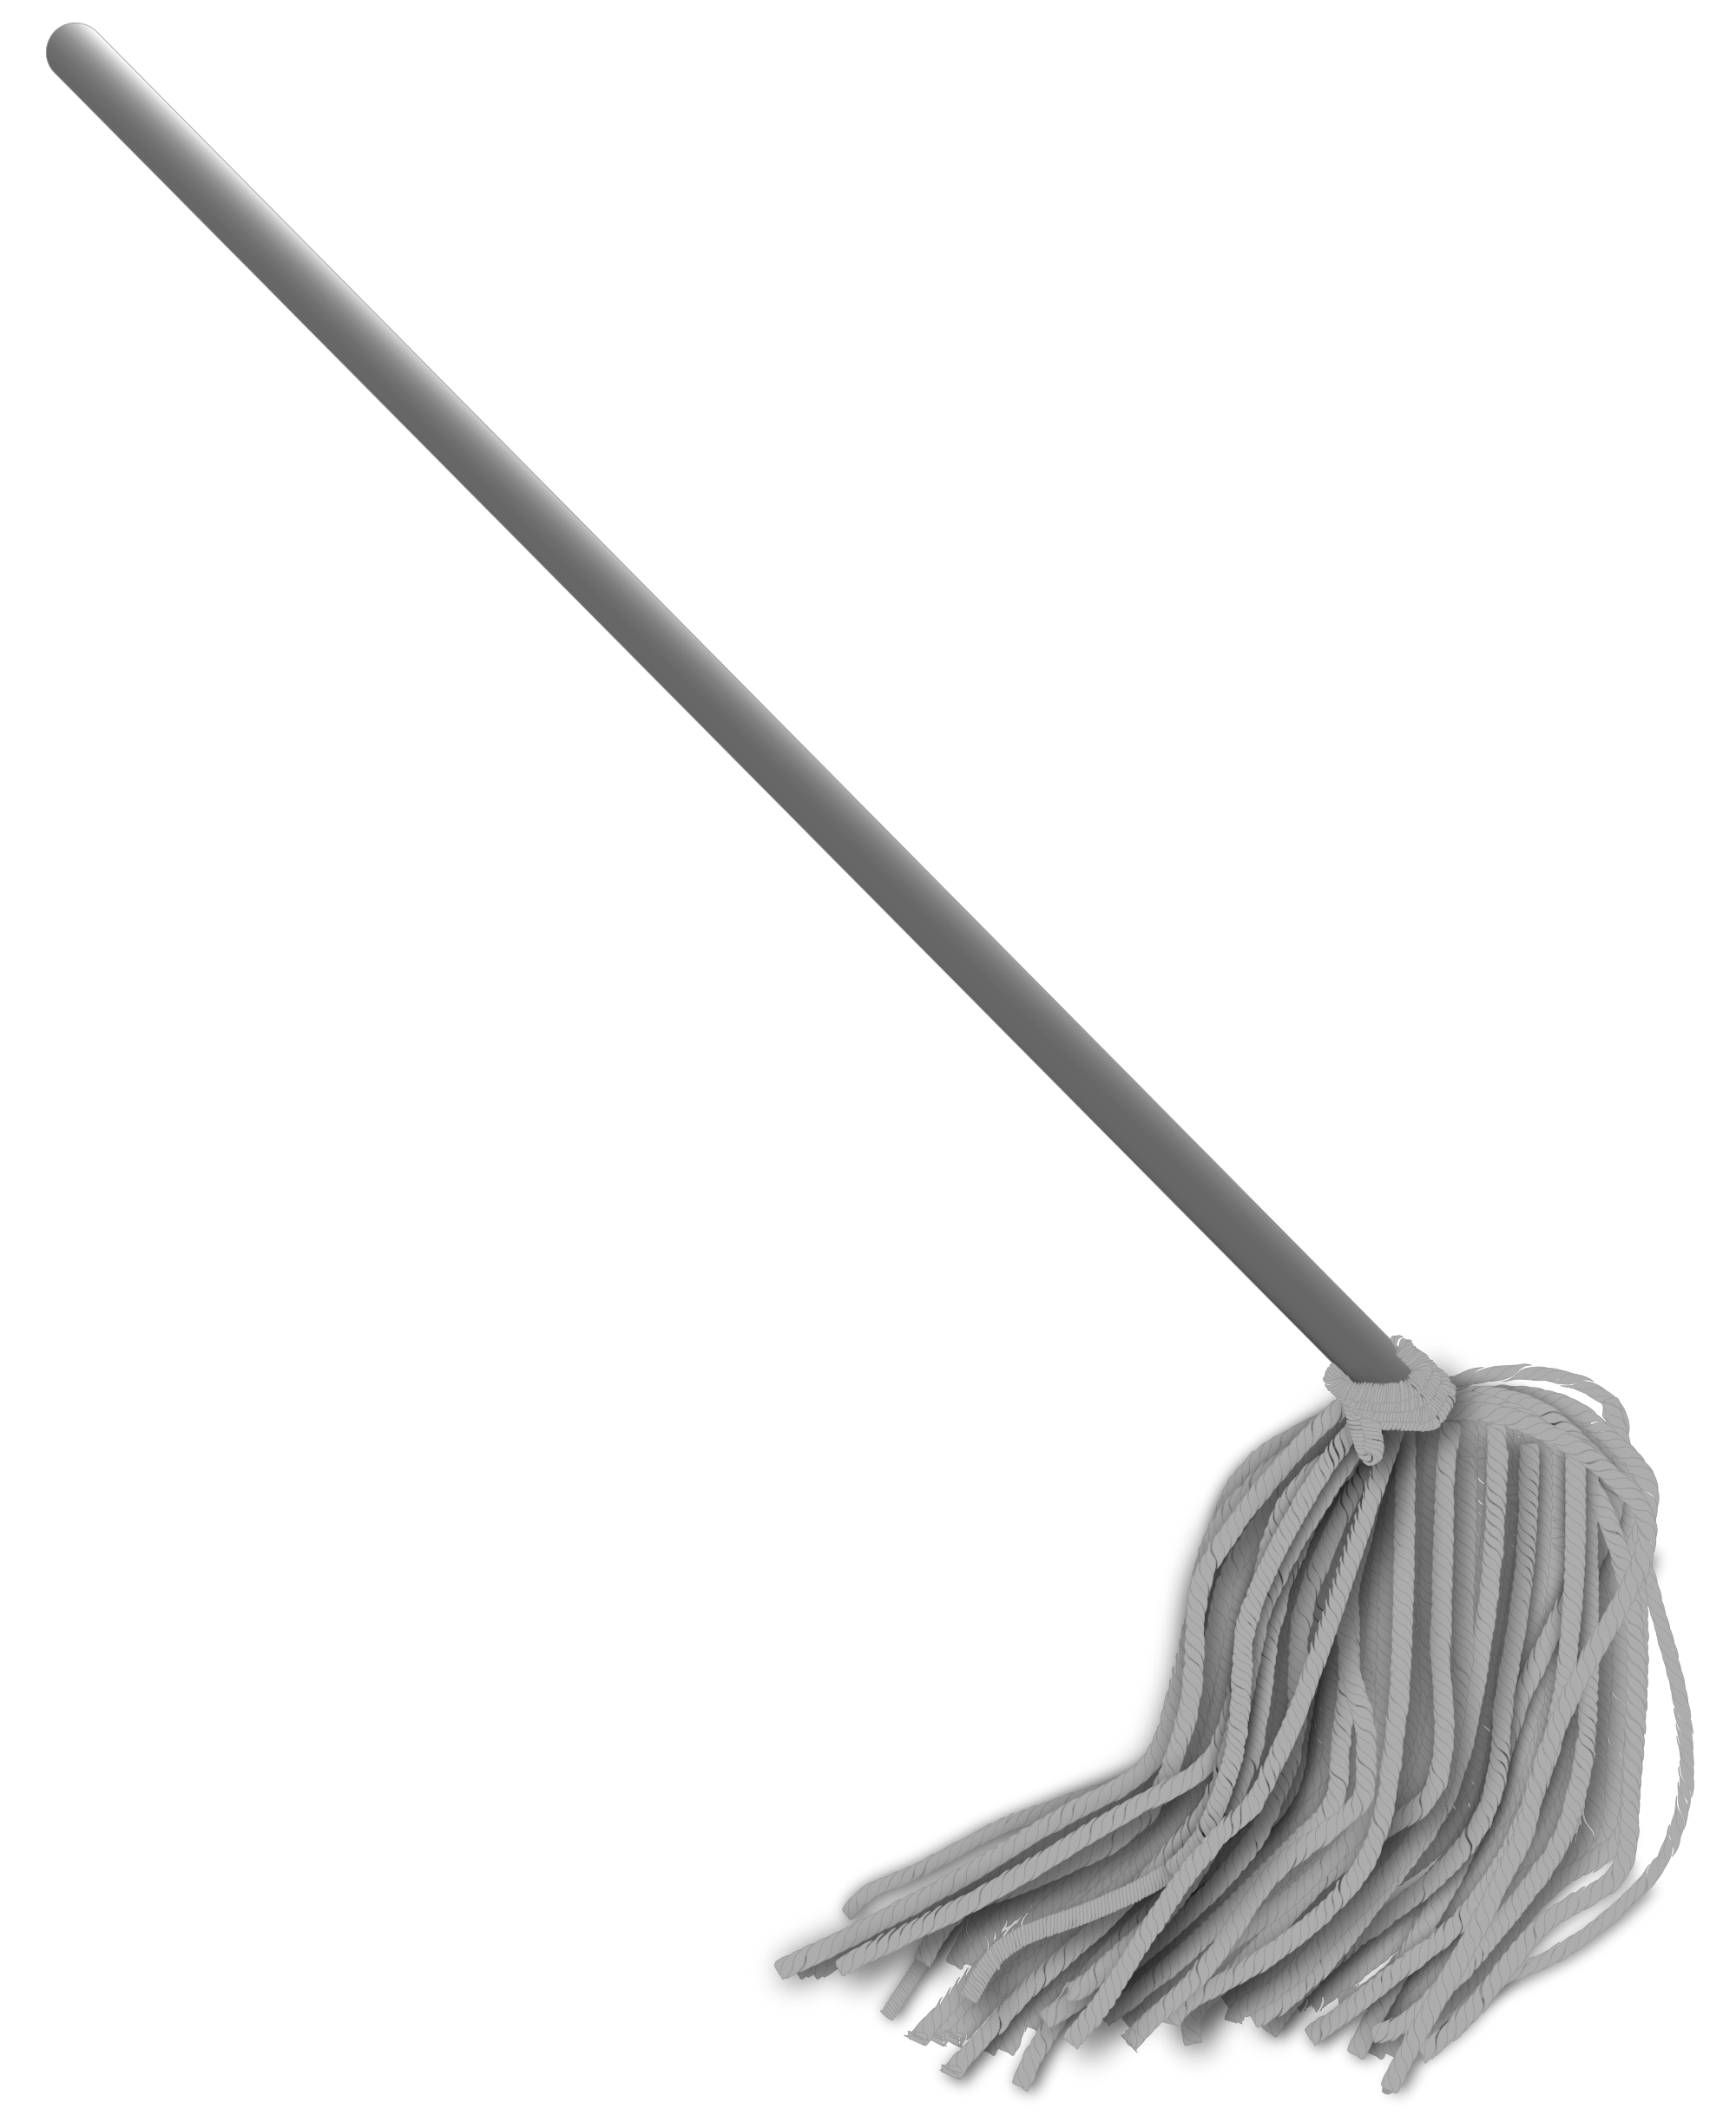  home cleaning tools. Dust clipart dust pan broom